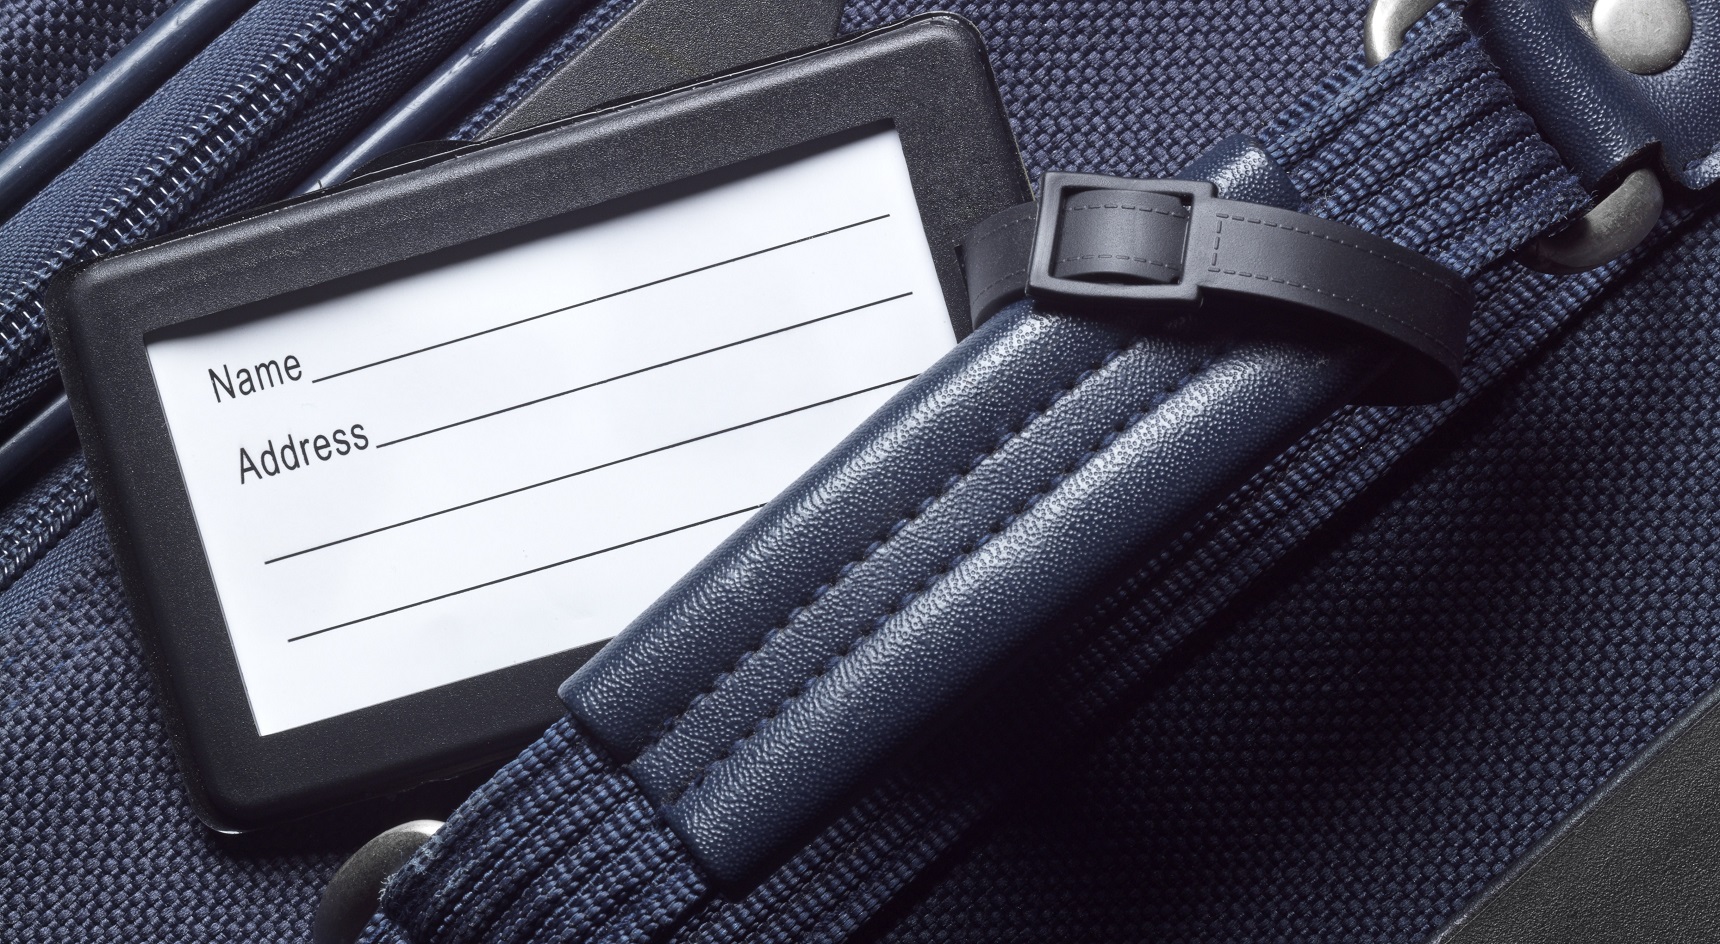 Ensure your bags are properly tagged. Image: iStock